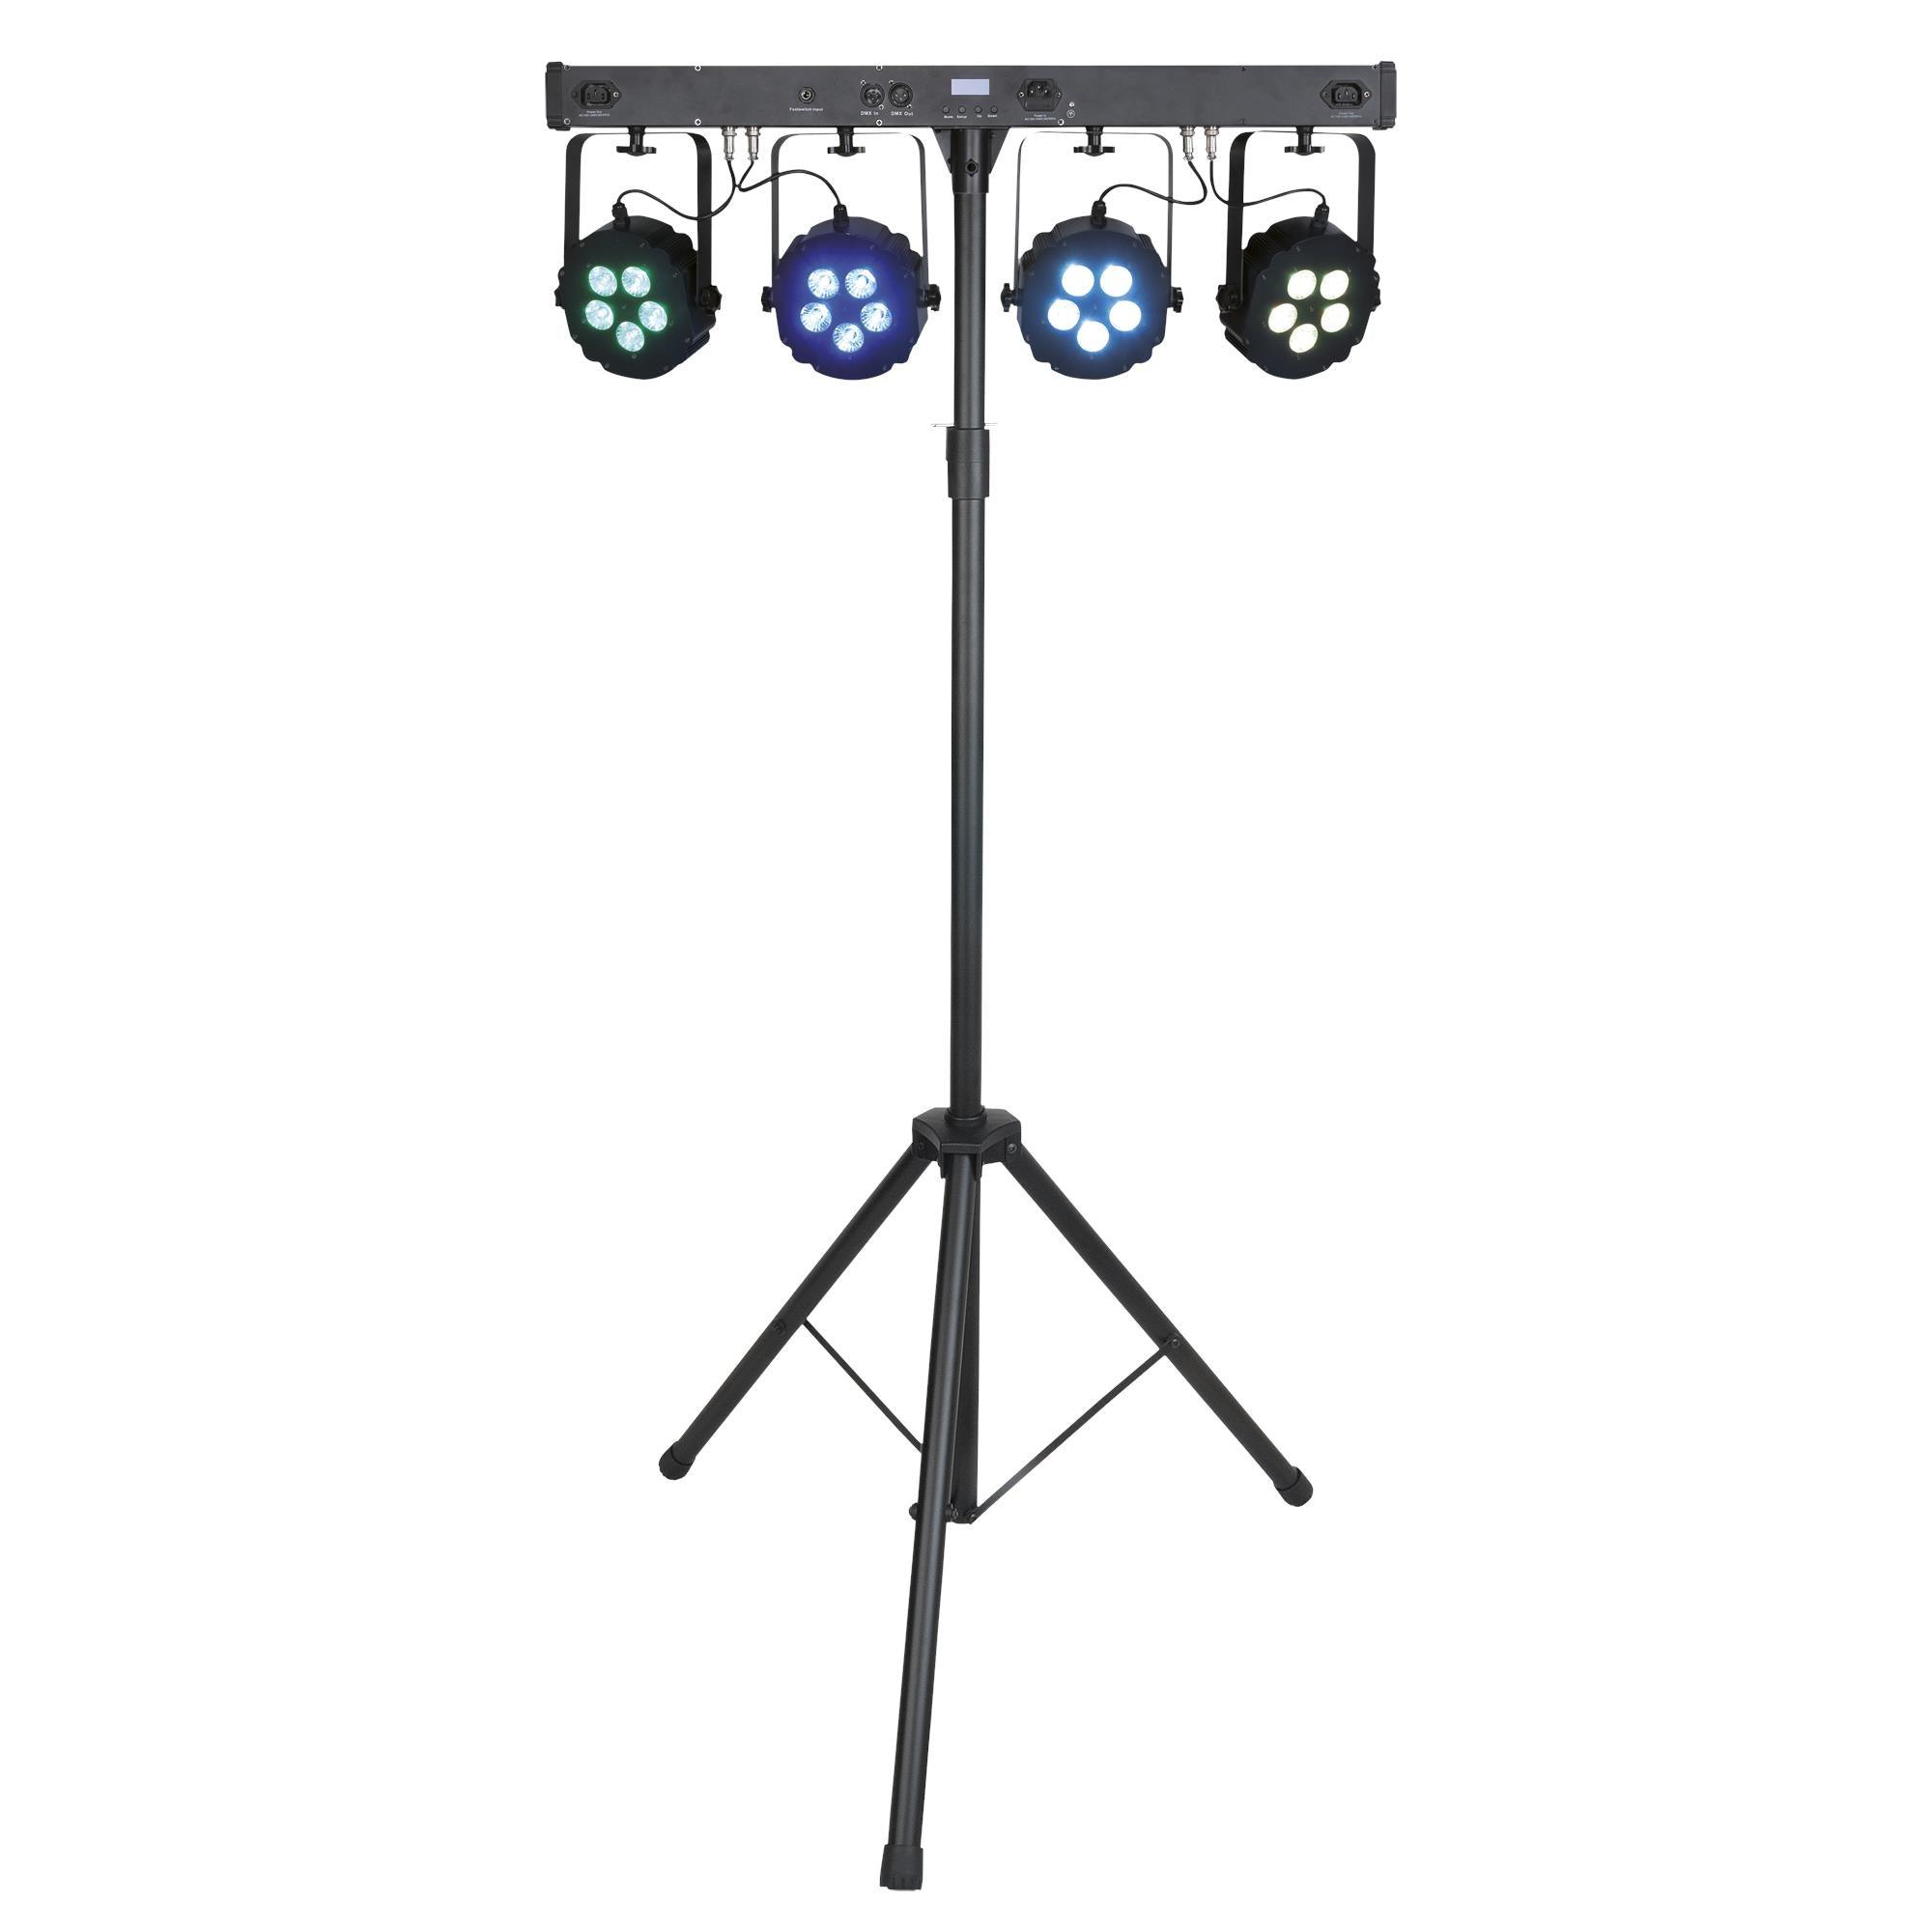 Showtec Compact Power Light Set 4 RGBW With Bag and Stand - DY Pro Audio